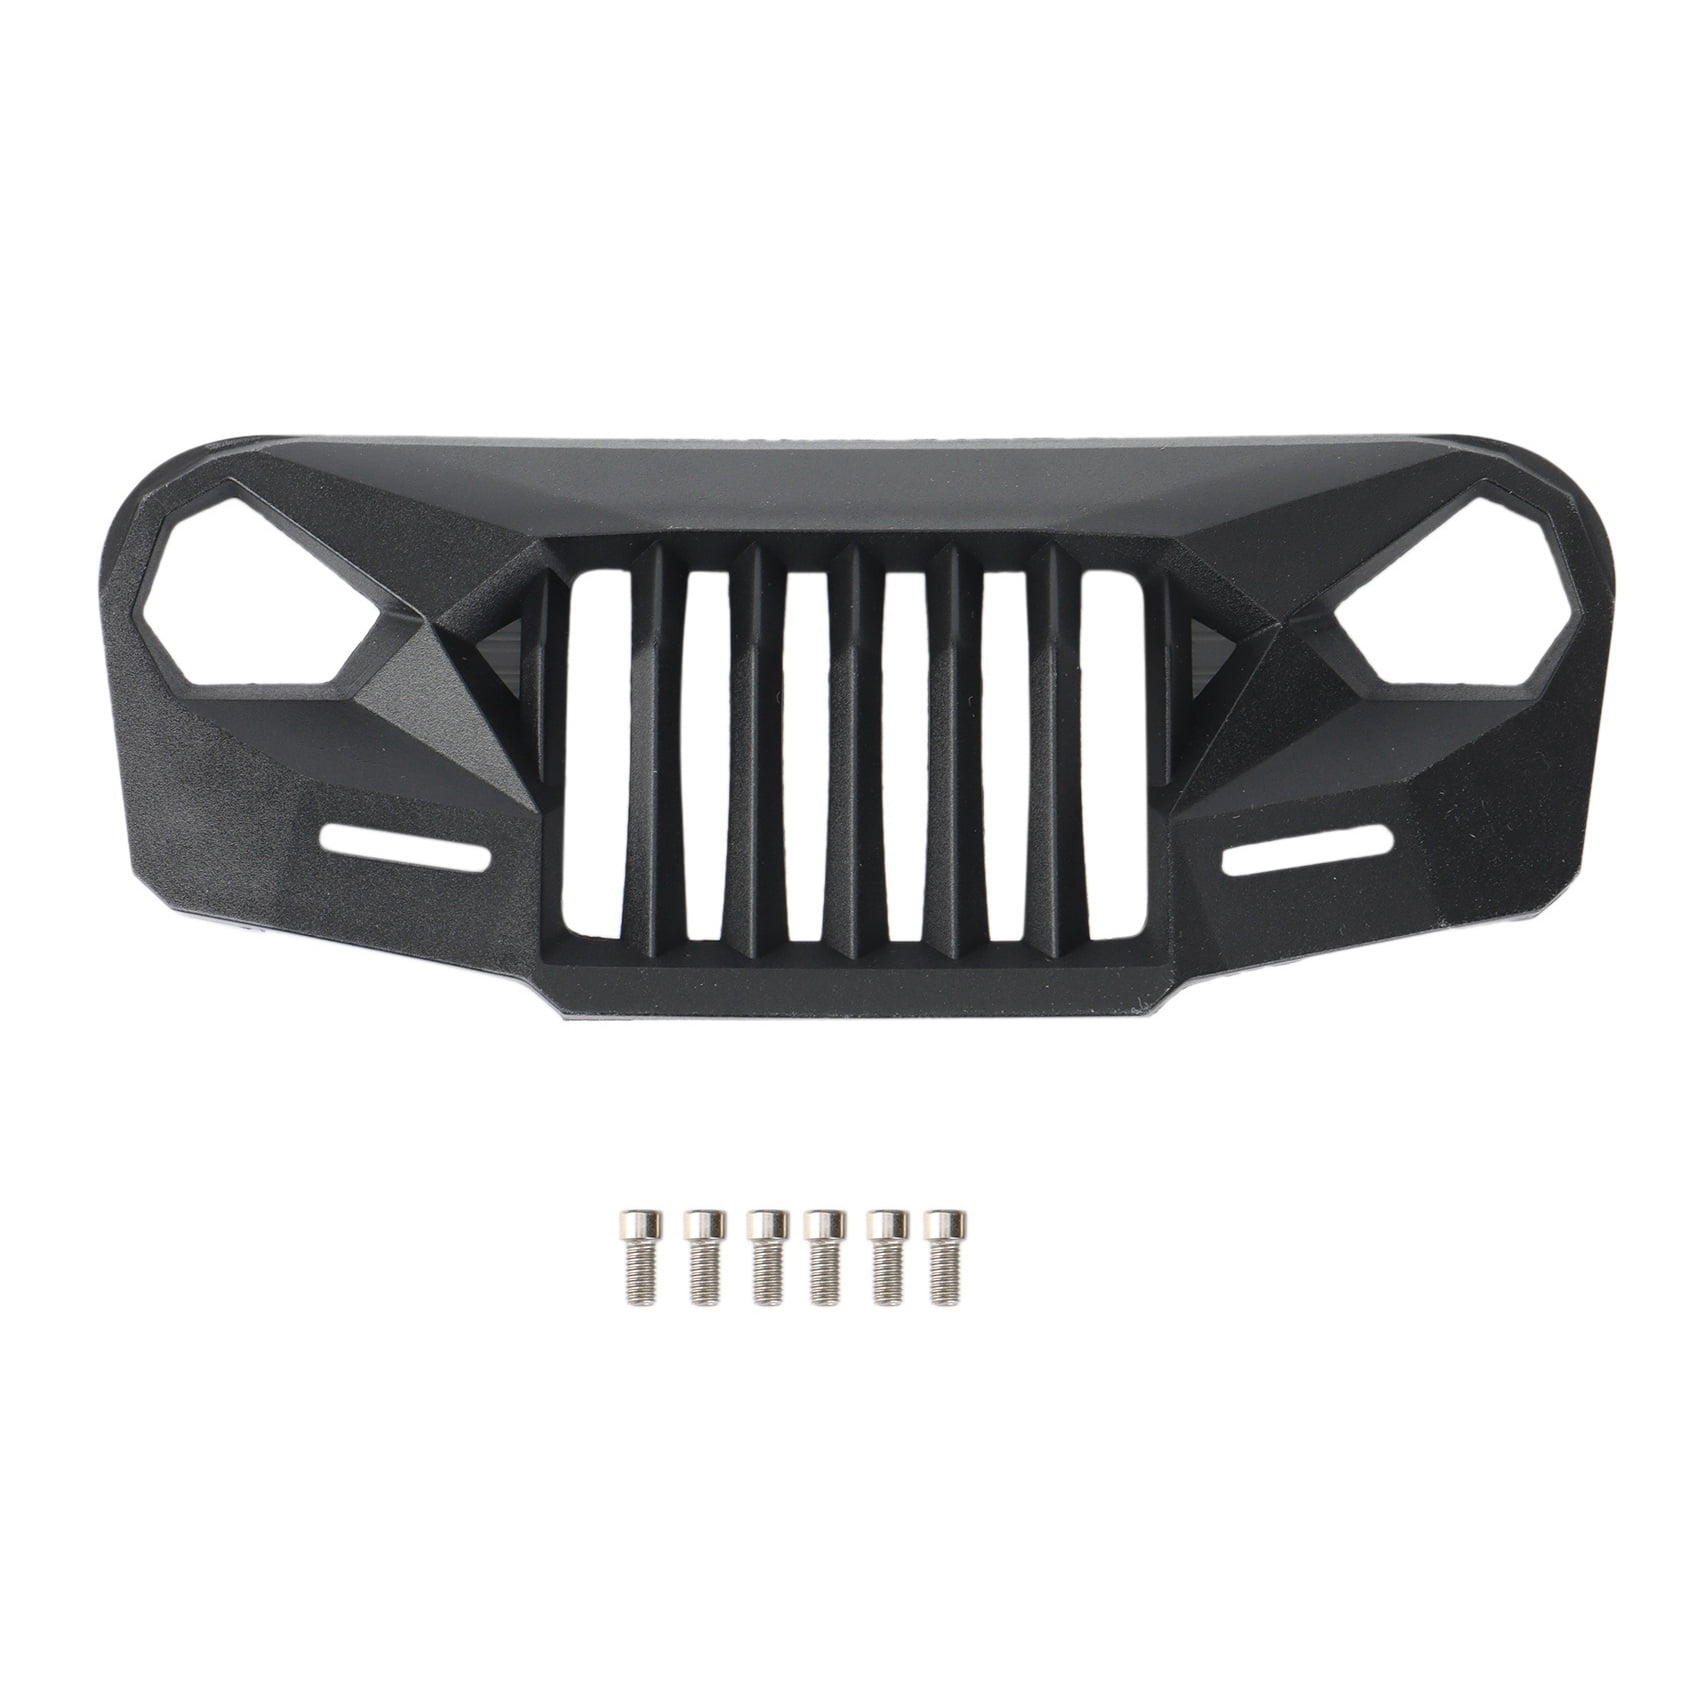 Xigeapg Ms Anger Front Face Grating Grille for 1/10 RC Crawler Car Axial  SCX10 II III 90046 AXI03007 Jeep Wrangler Body Parts 